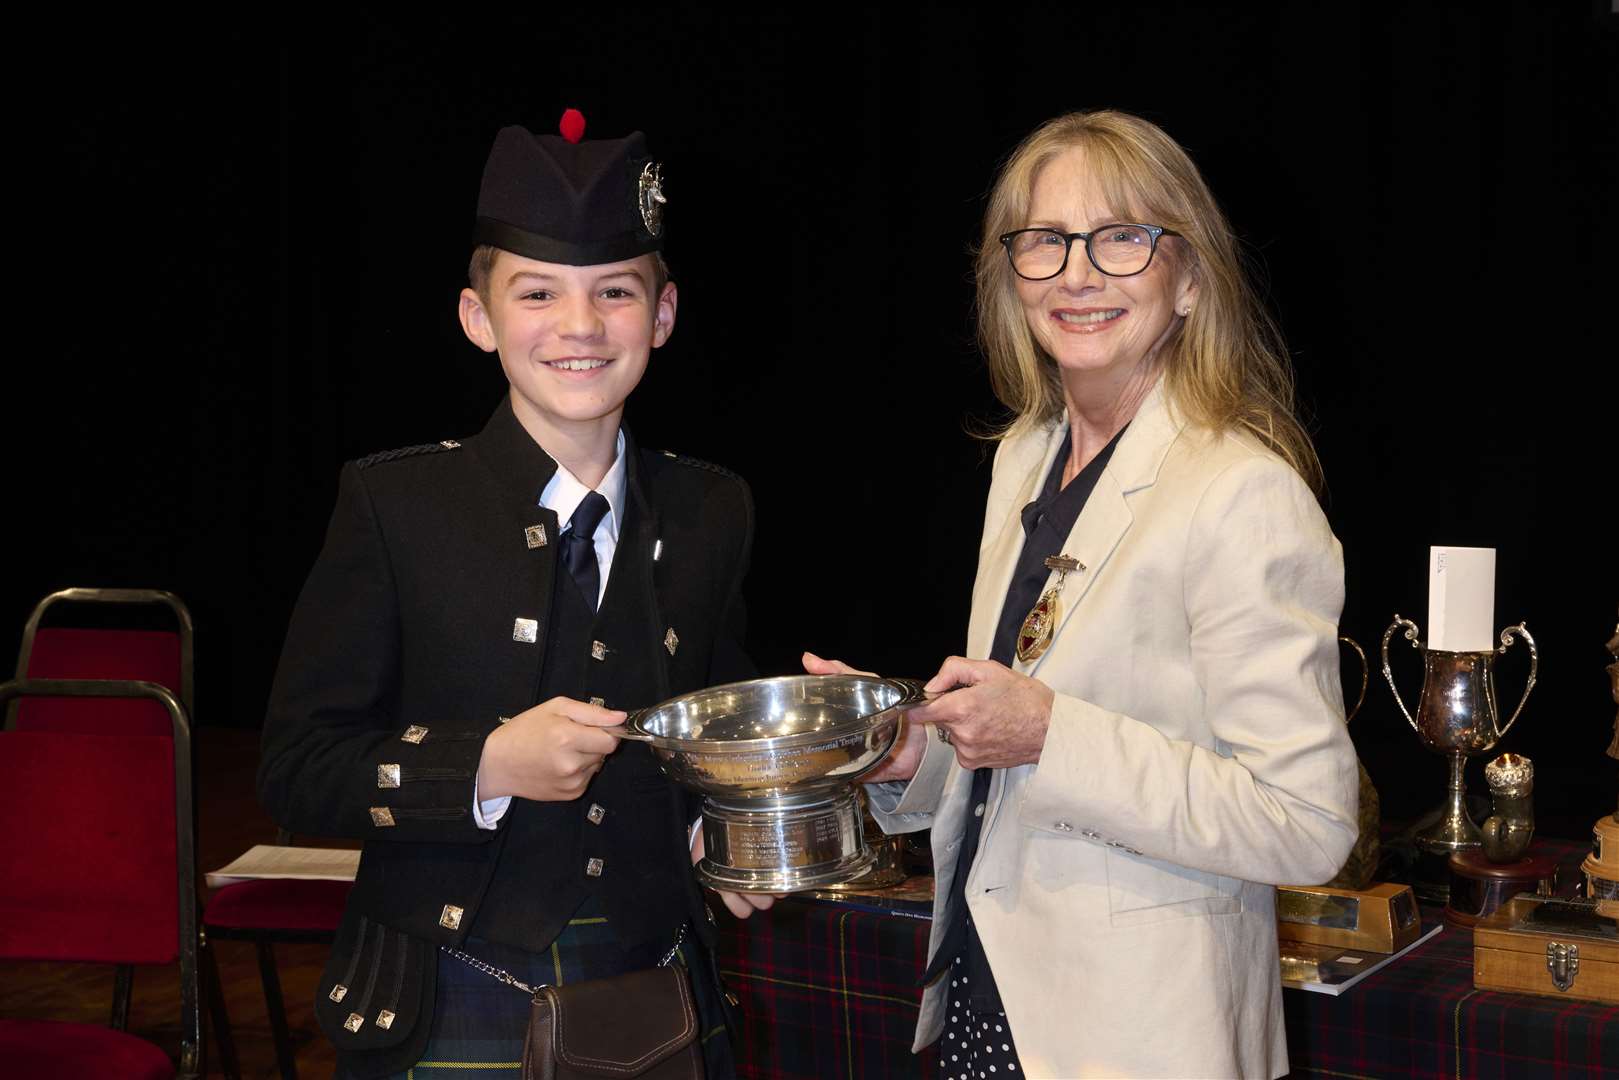 Glynis Campbell-Sinclair (the Provost of Inverness) with Rory Manzies who won the U15 MSR at the Northern Meeting 2022 which was held at Eden Court in Inverness.